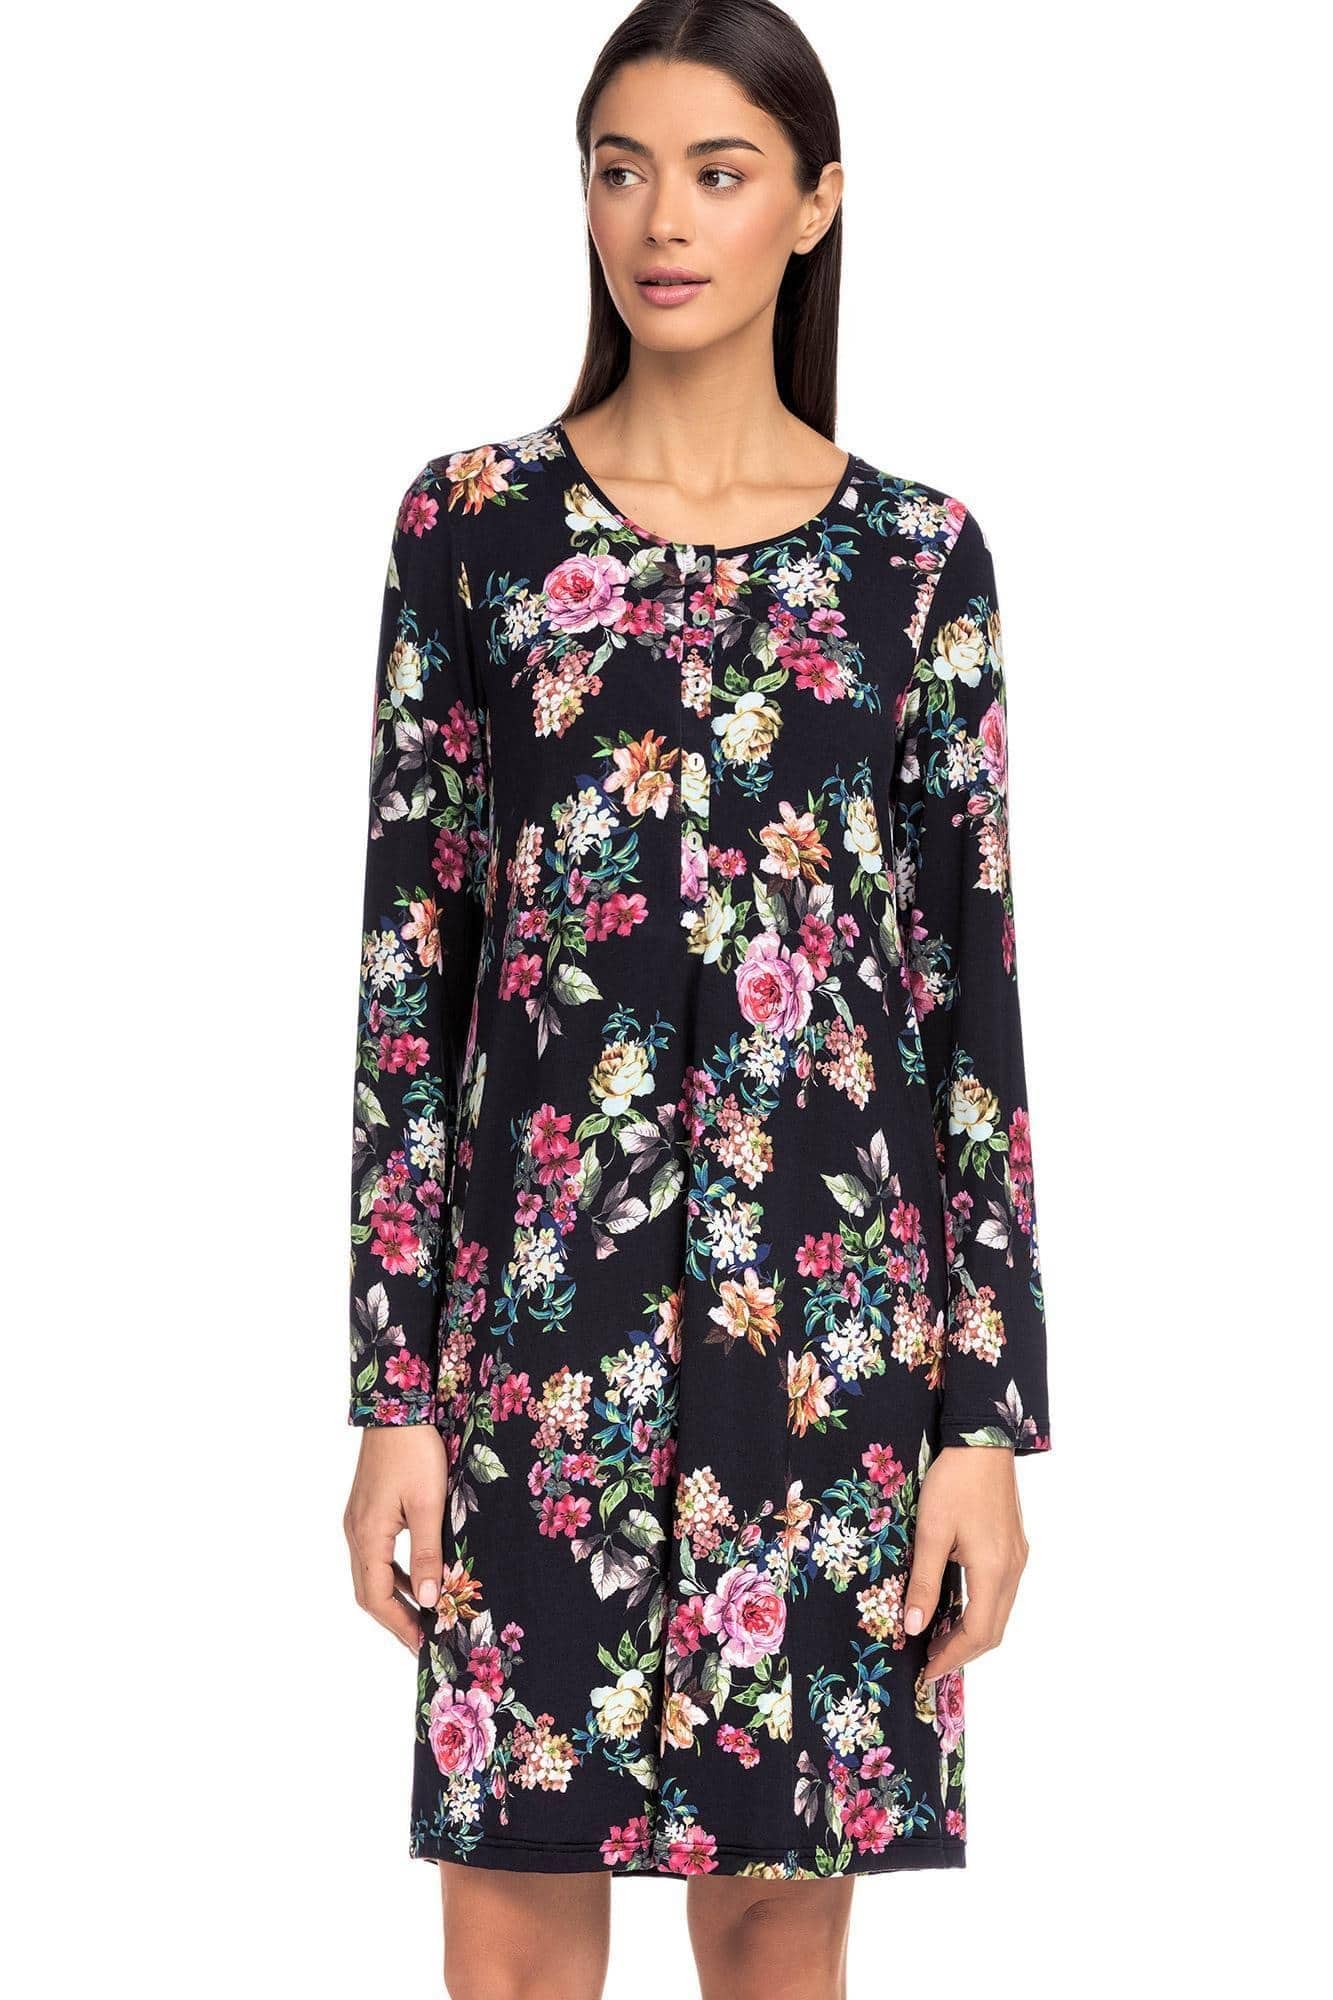 Women’s floral Nightgown